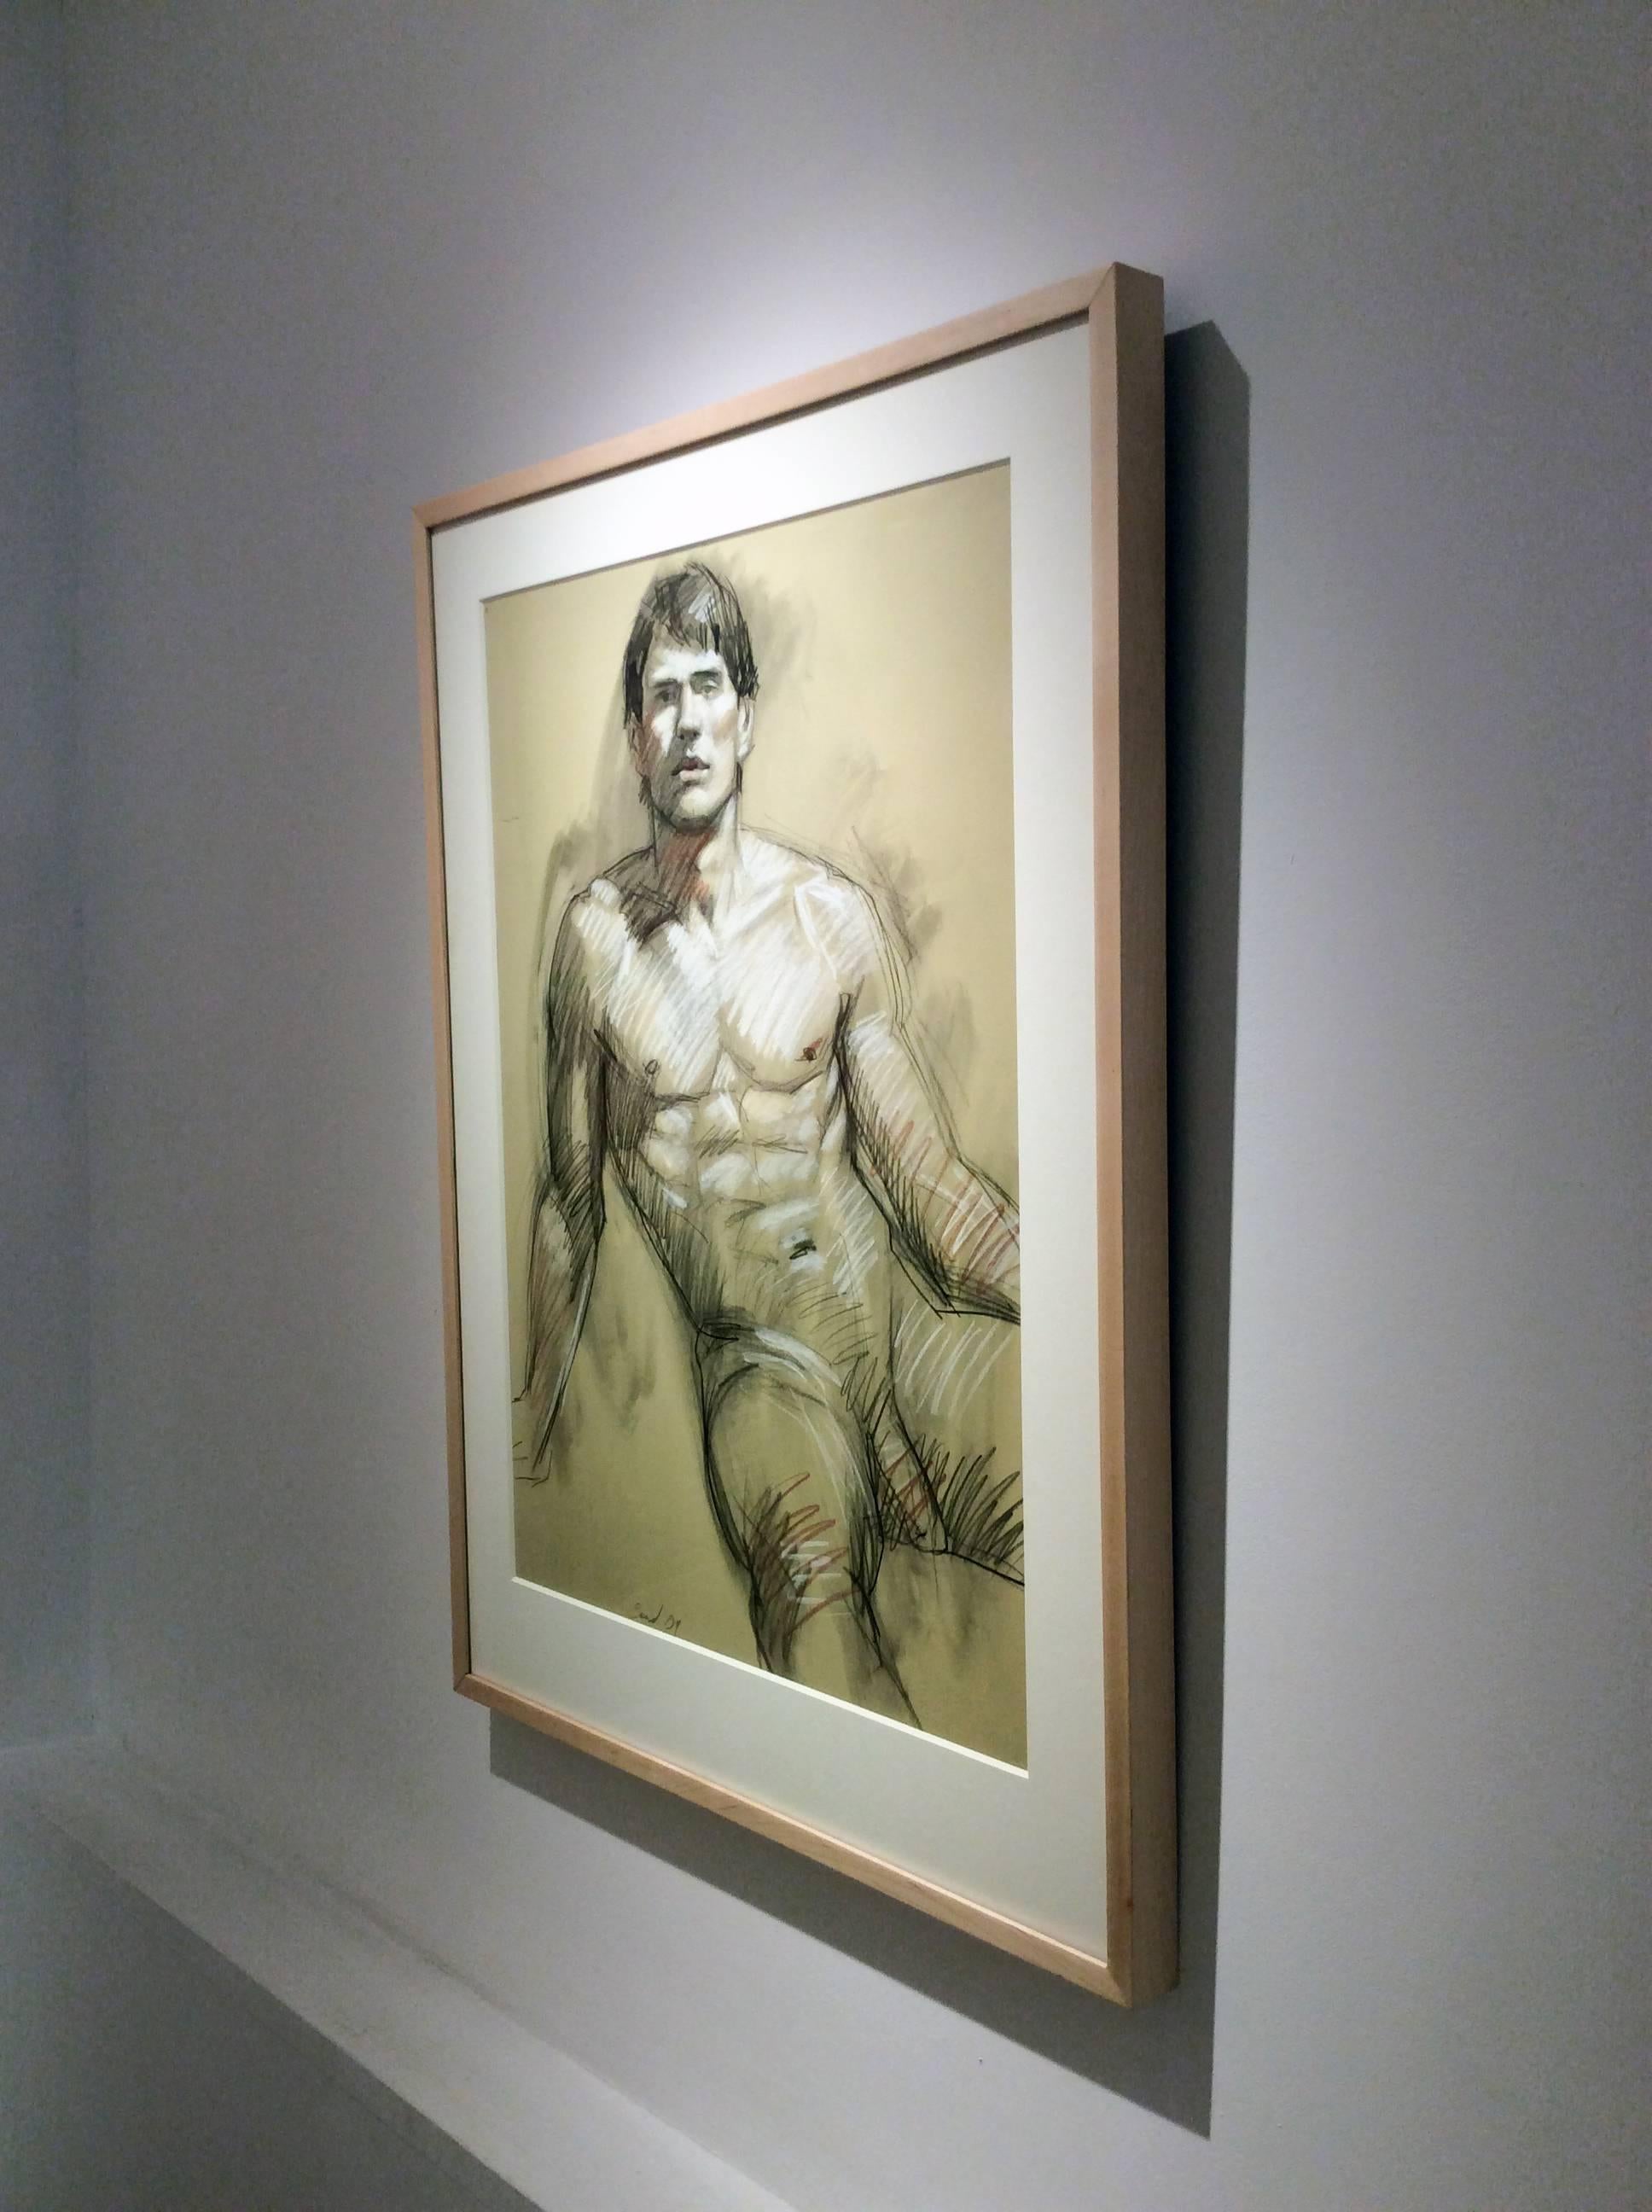 MB 802 (Contemporary Figurative Drawing of Male Nude with Wood Frame) 2